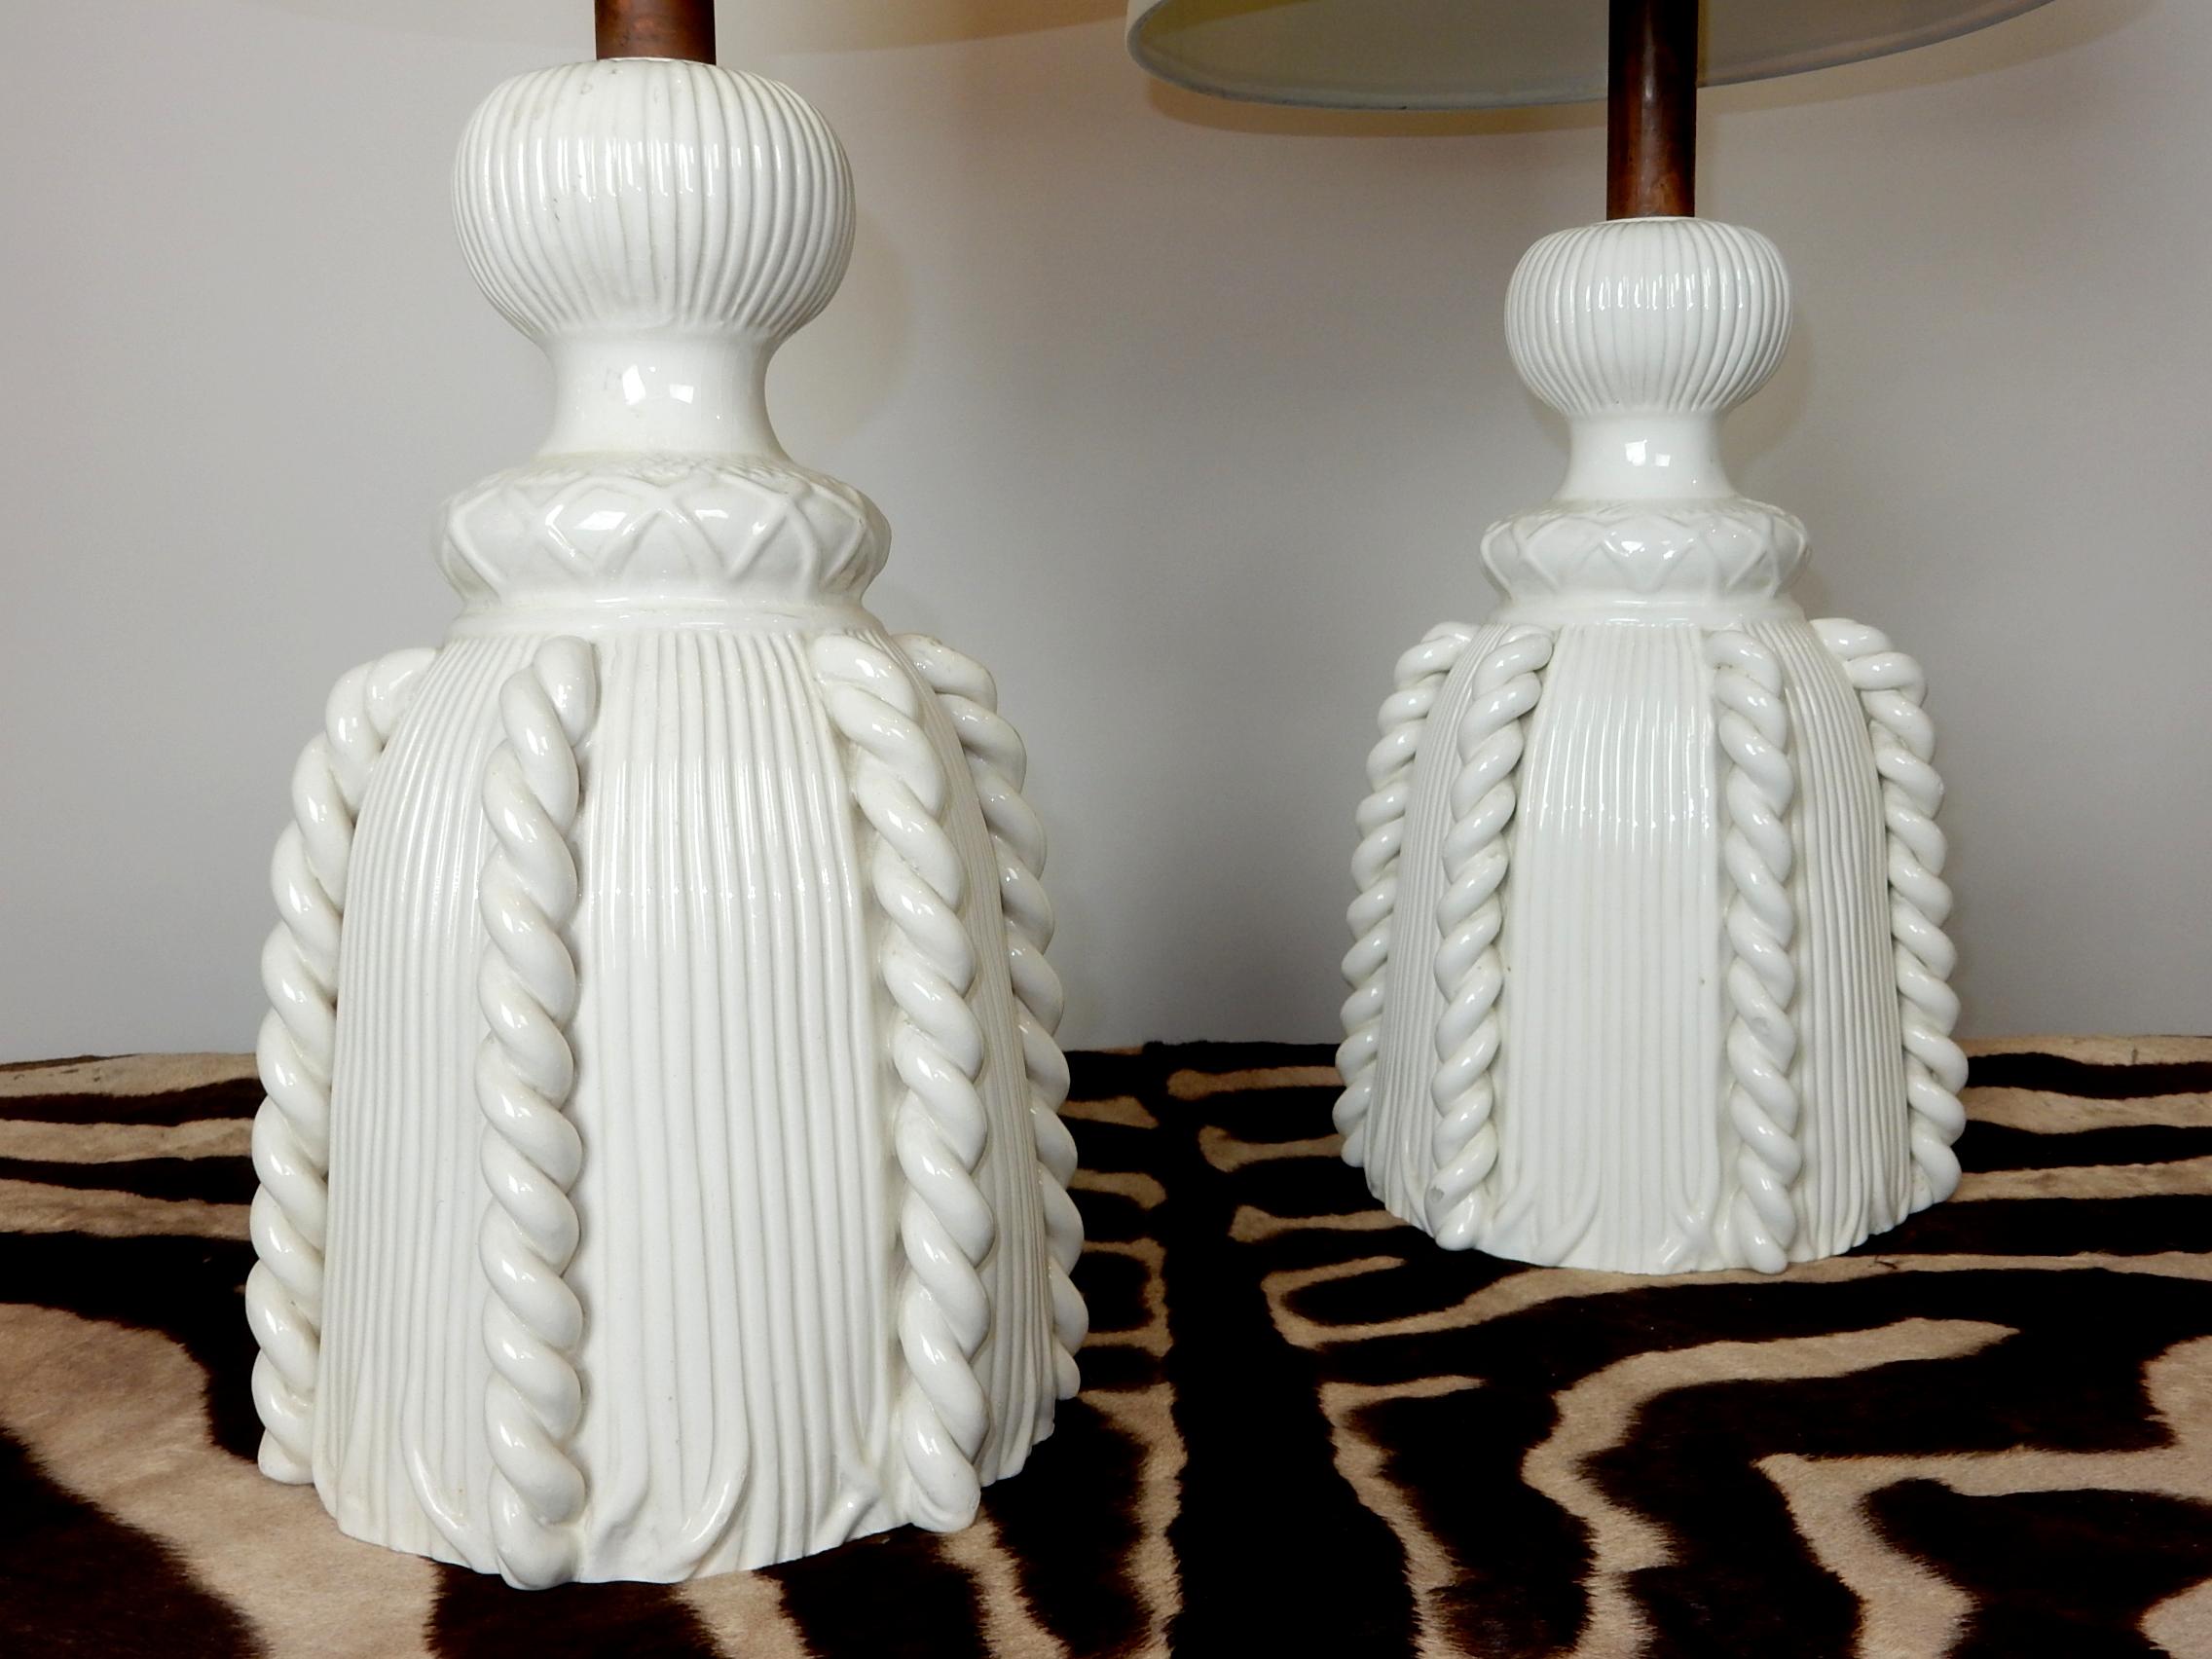 Gorgeous porcelain rope tassel sculpture table lamps with glossy blanc de chine white glaze! 
Both signed Bassenello on inside. Aged copper top. 
Brass Asian motif finials included(shades not included).
 